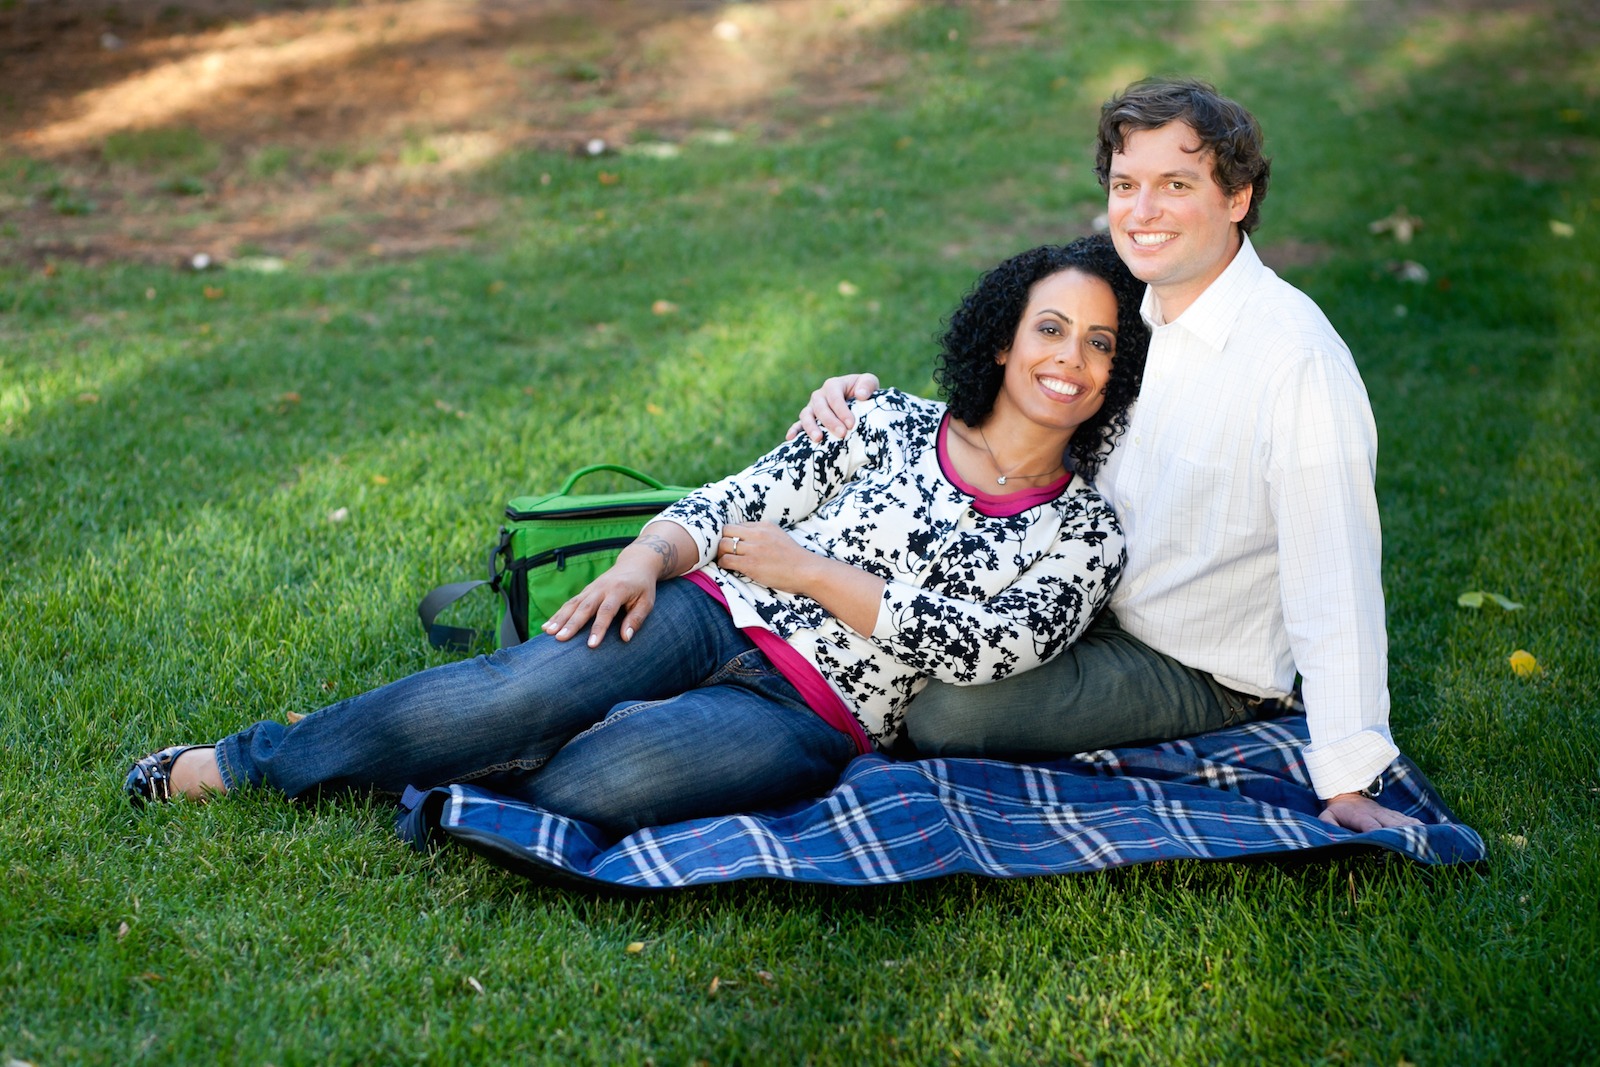 a woman leans against a man as they both sit on a blue picnic blanket